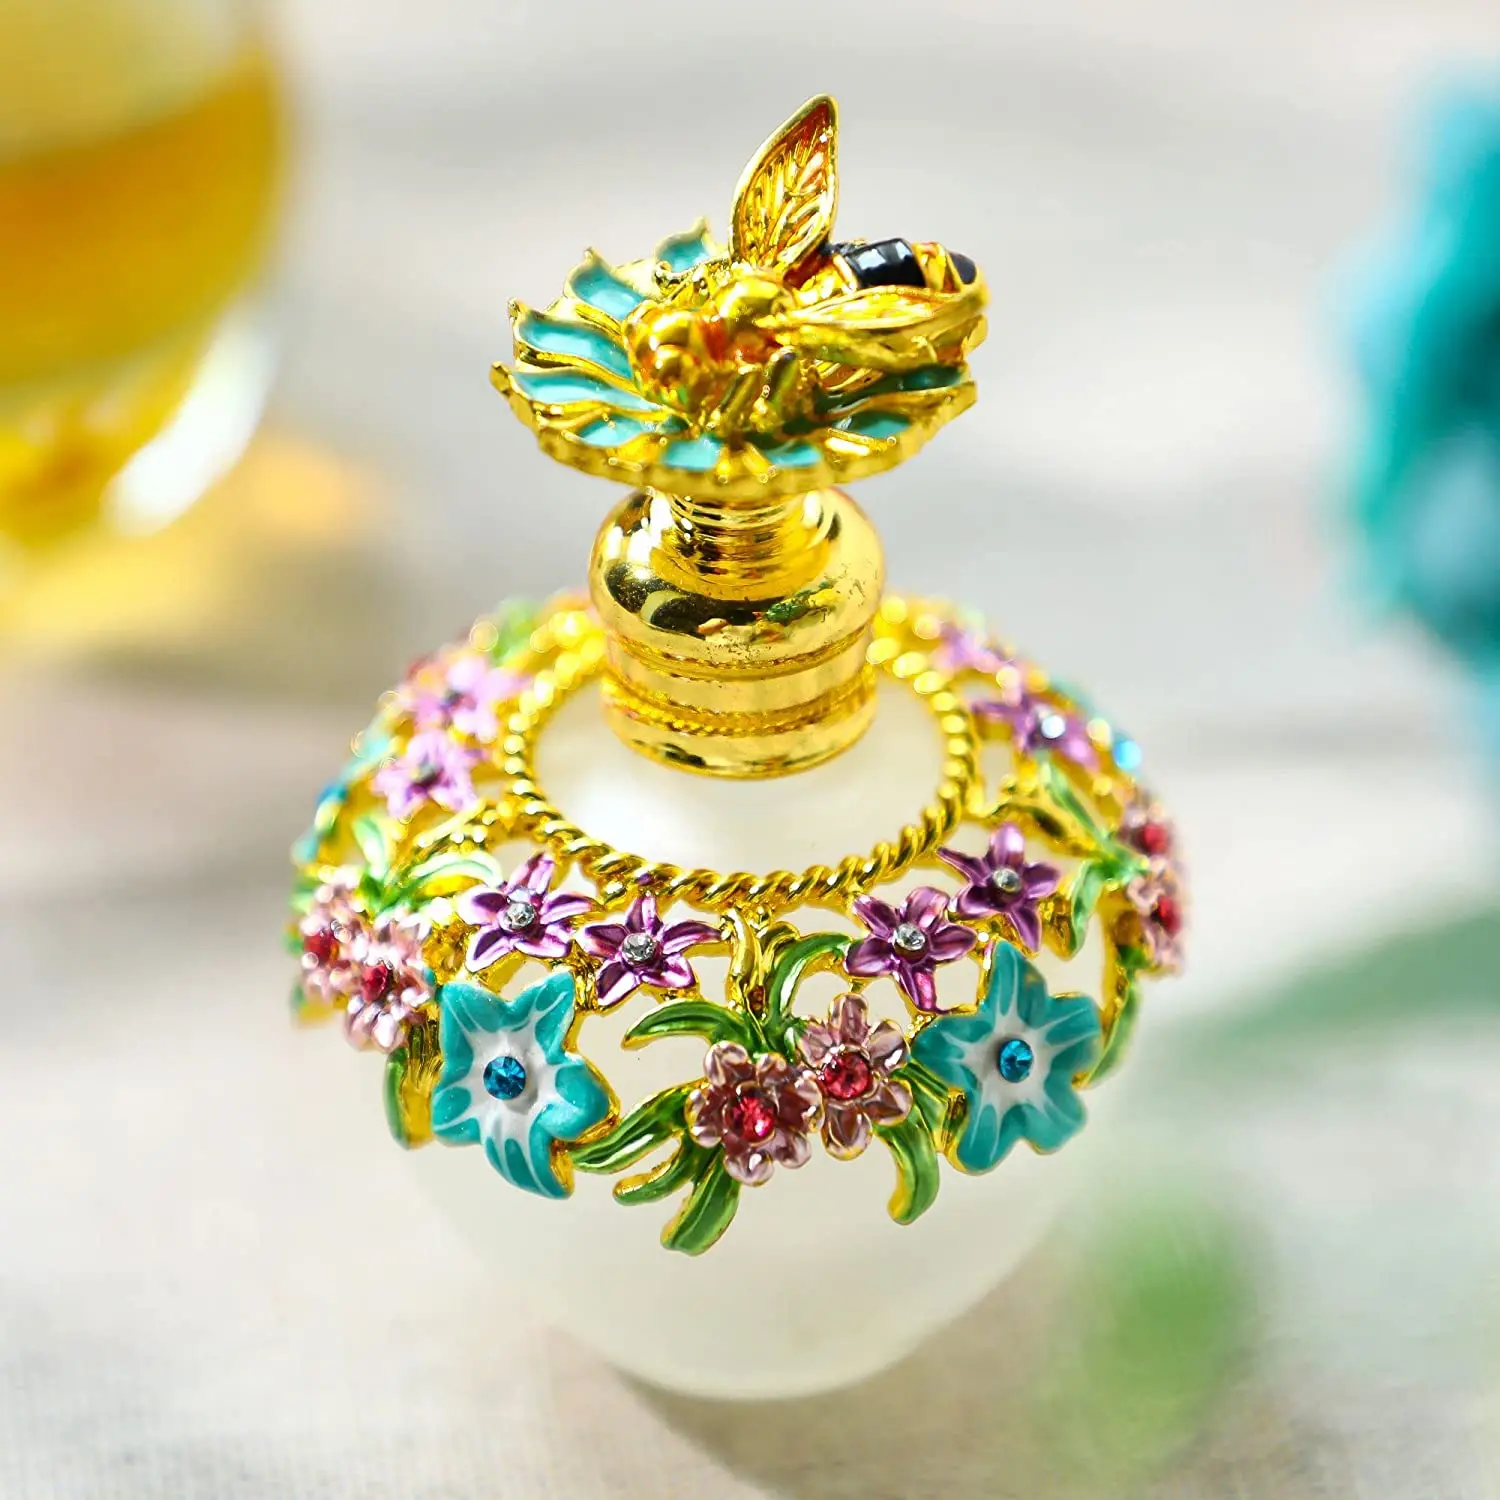 H&D Fancy Glass Perfume Bottle Empty with Flowers Bee Charm Decorative Vintage Crystal Perfume Decanter(Golden,40ML) boys girls slipper with sute cartoon rabbit charm summer comfortable light weight sandals outside for toddler kids student